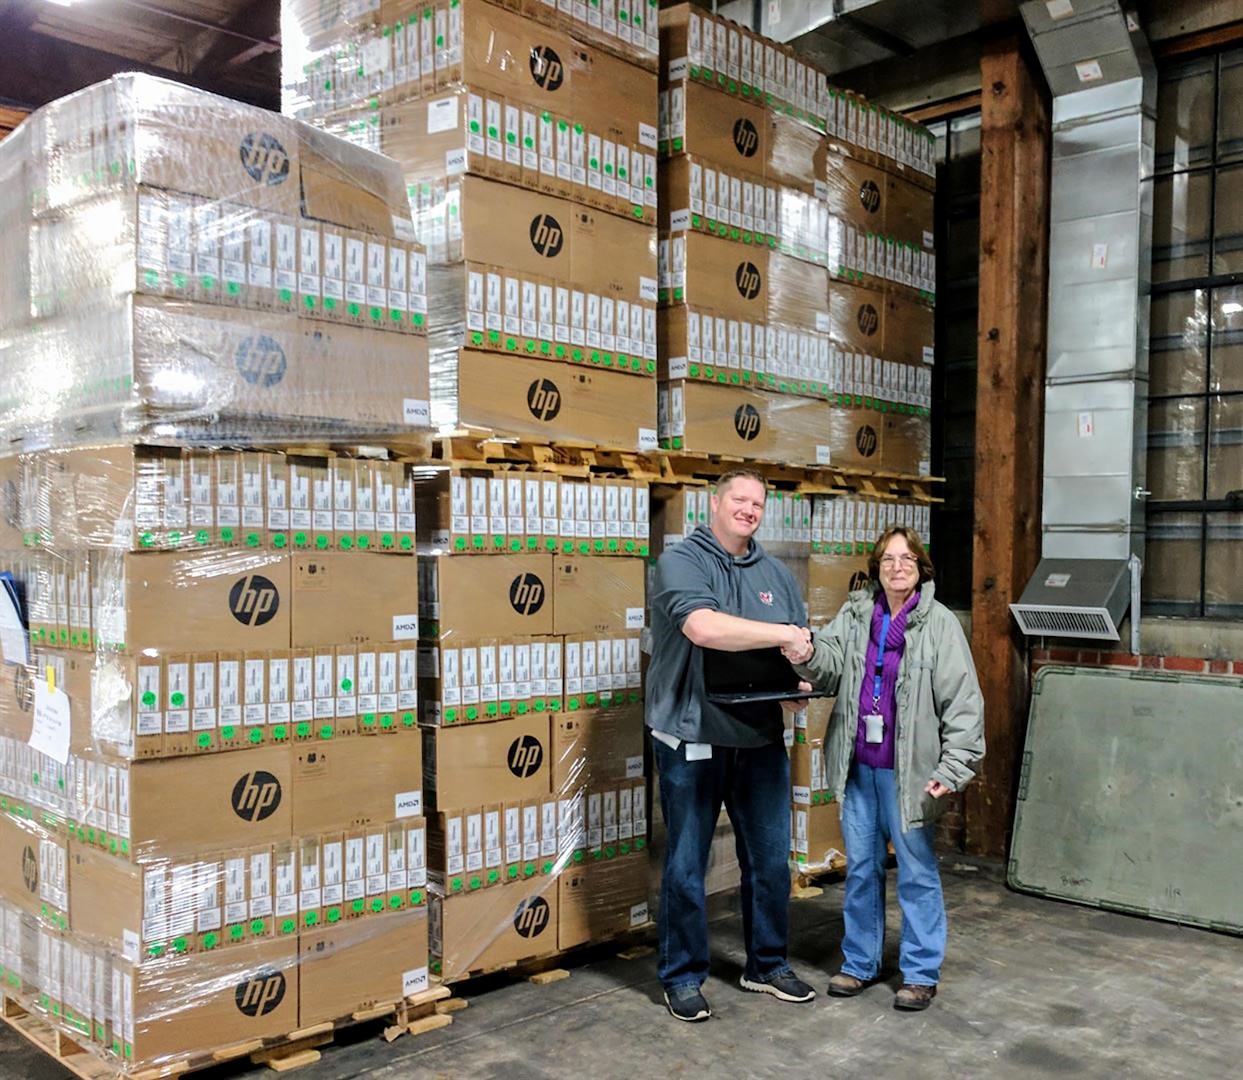 District Technology Supervisor Ryan Stockton of Ohio’s Minford Local School District shakes the hand of DLA Disposition Services Property Disposal Specialist Cindy Anderson as he prepares to load up 1,300 excess laptops that no longer met DoD security requirements.